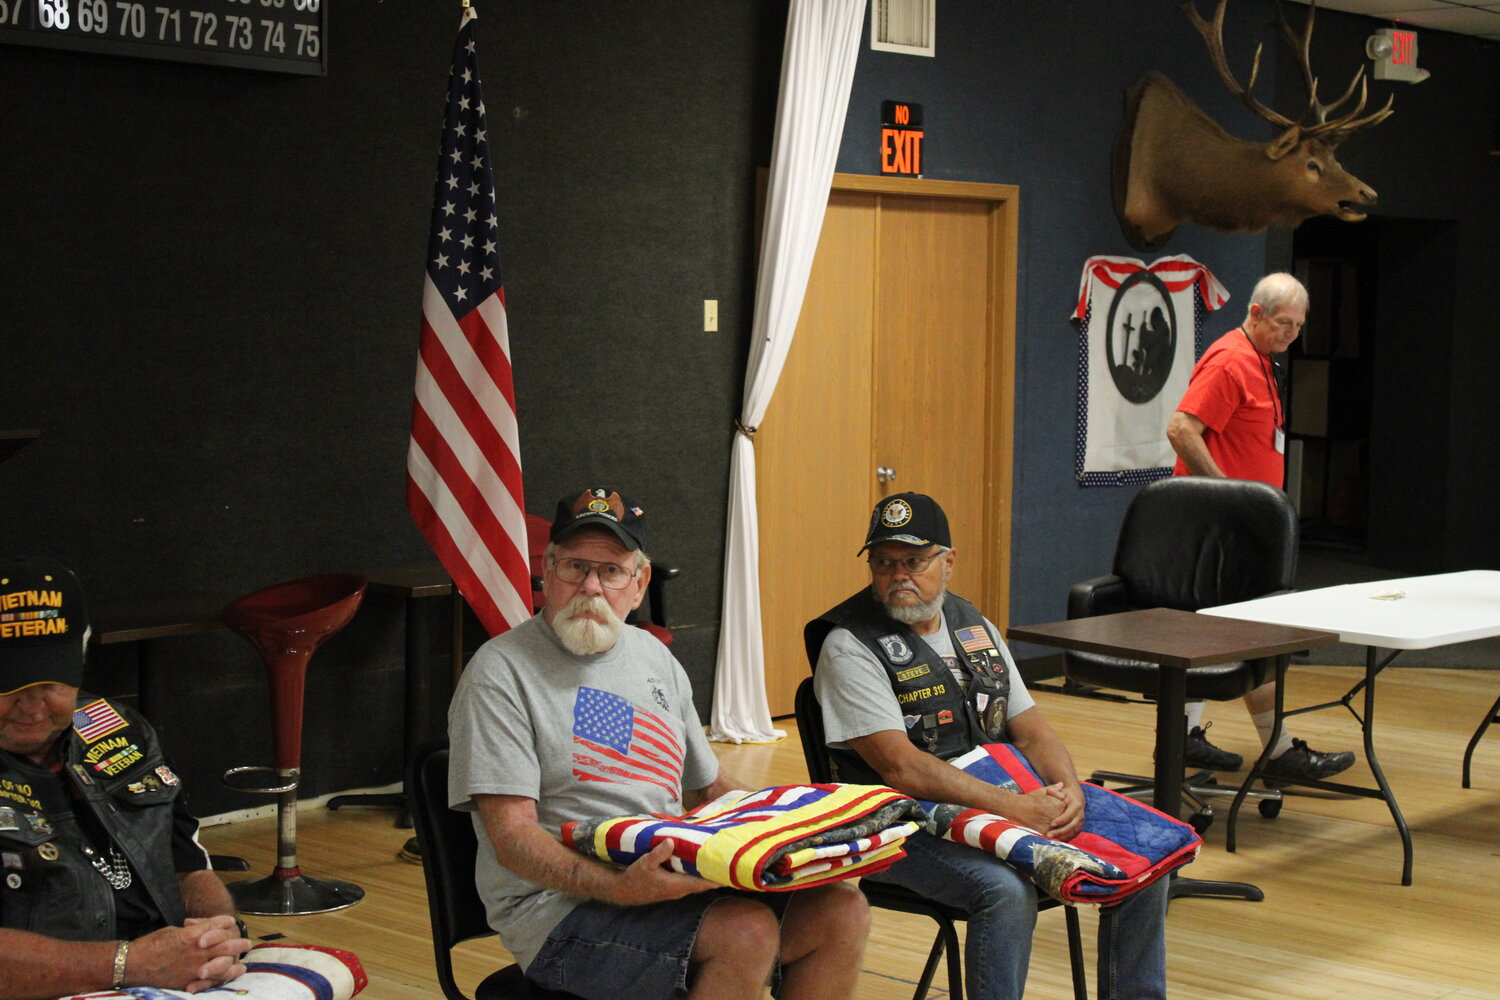 Rob Miller, of Warrenton, holds his quilt as he listens to the end of the presentation July 12 at the Elks Lodge.